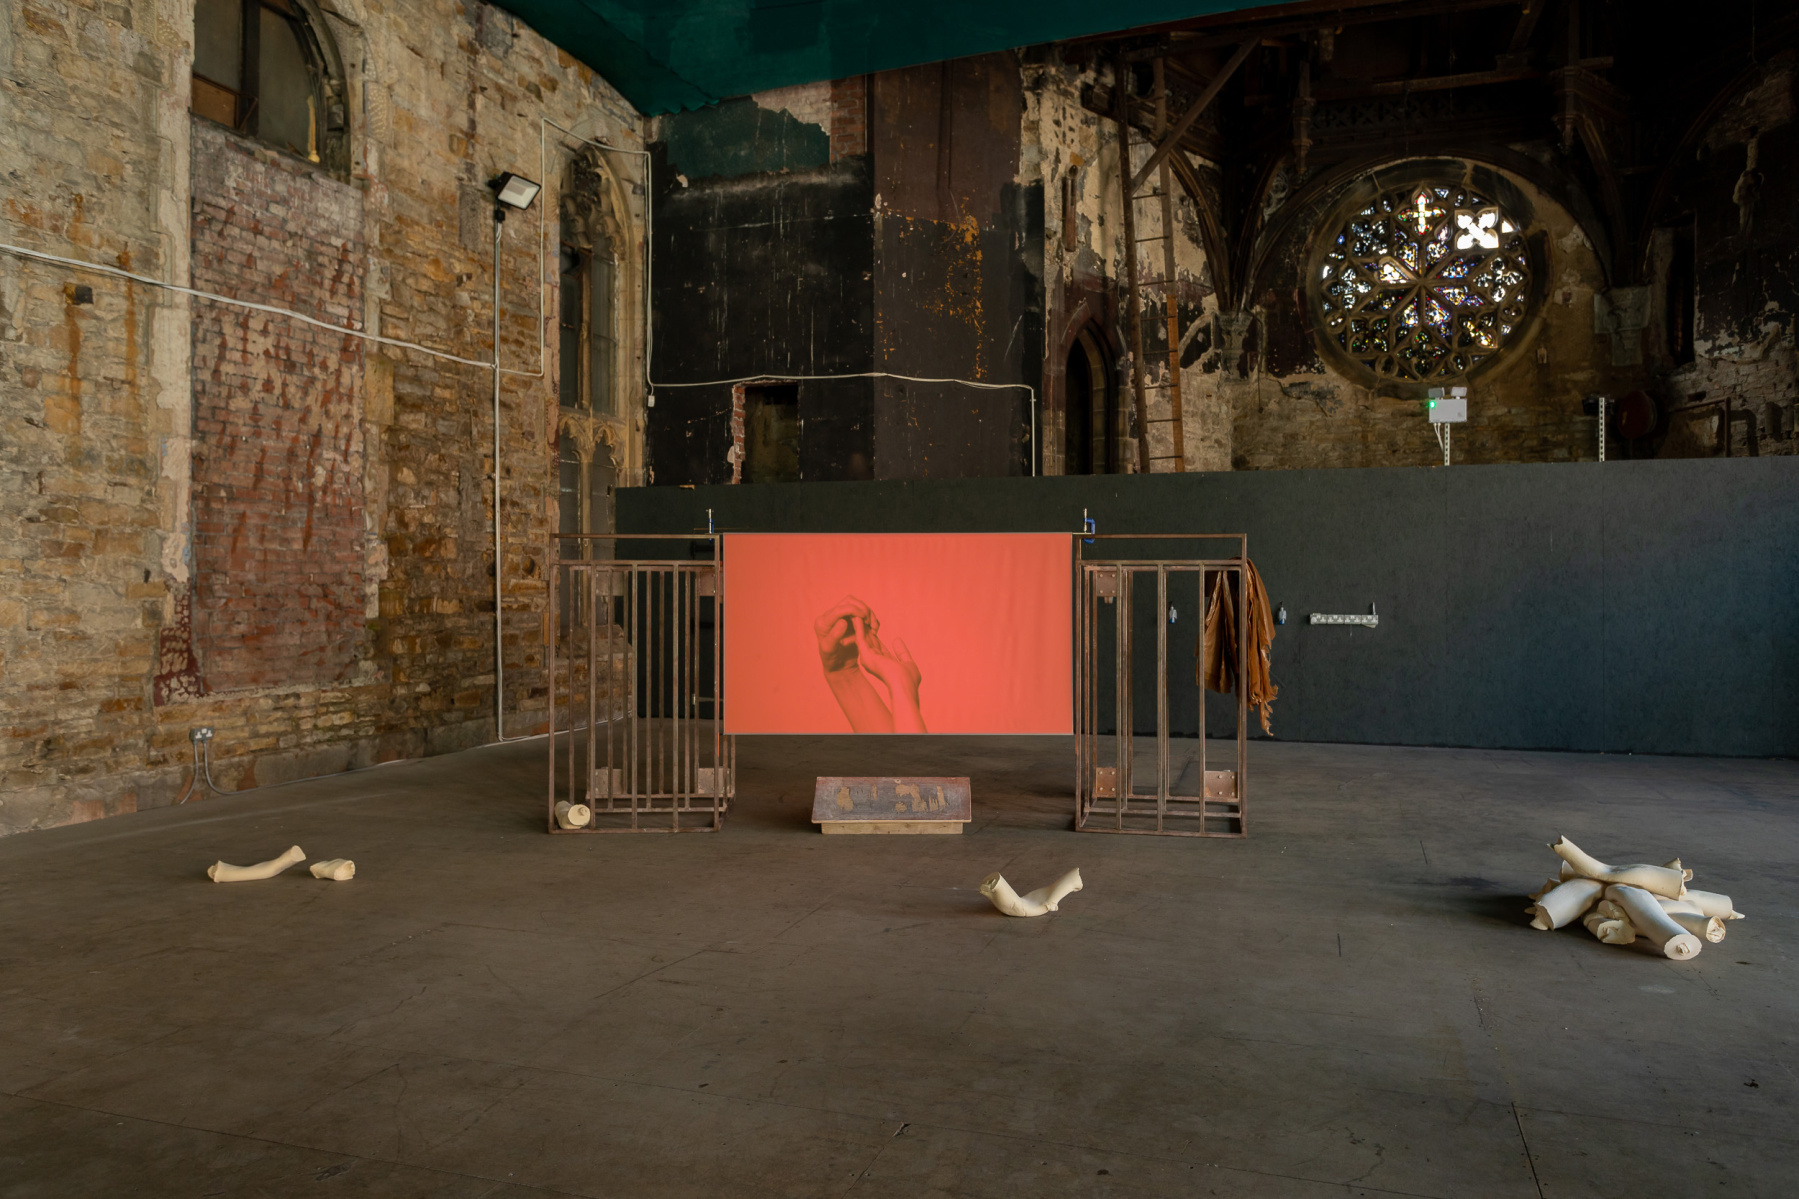 Installation view of 'Articulations' showing 'Compassionate Attention' at The National Festival of Making, Blackburn, UK